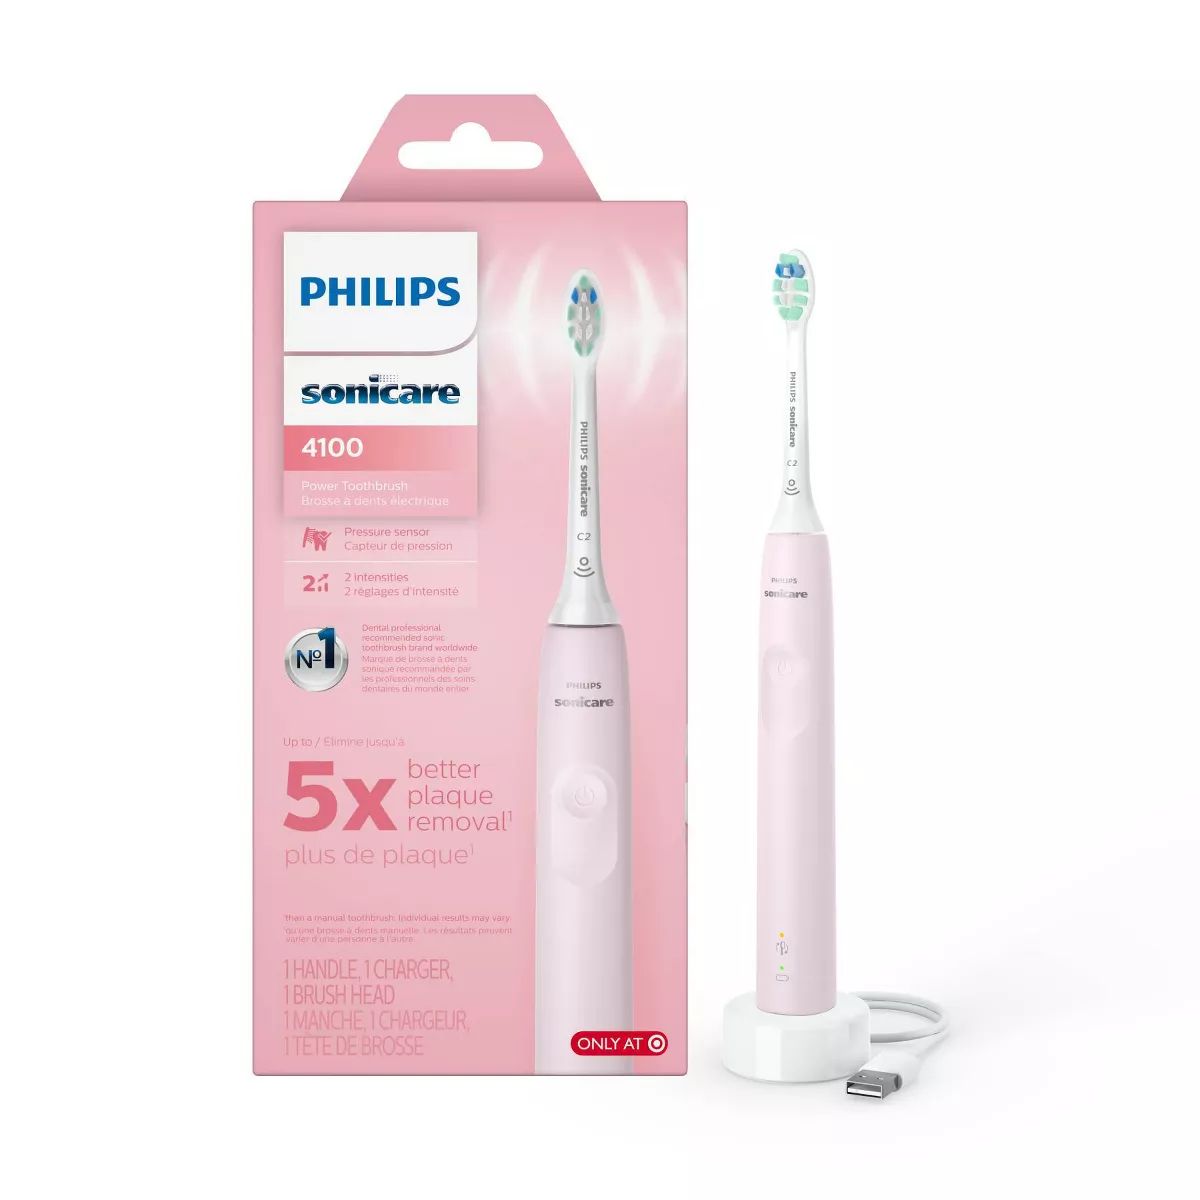 Philips Sonicare 4100 Plaque Control Rechargeable Electric Toothbrush | Target